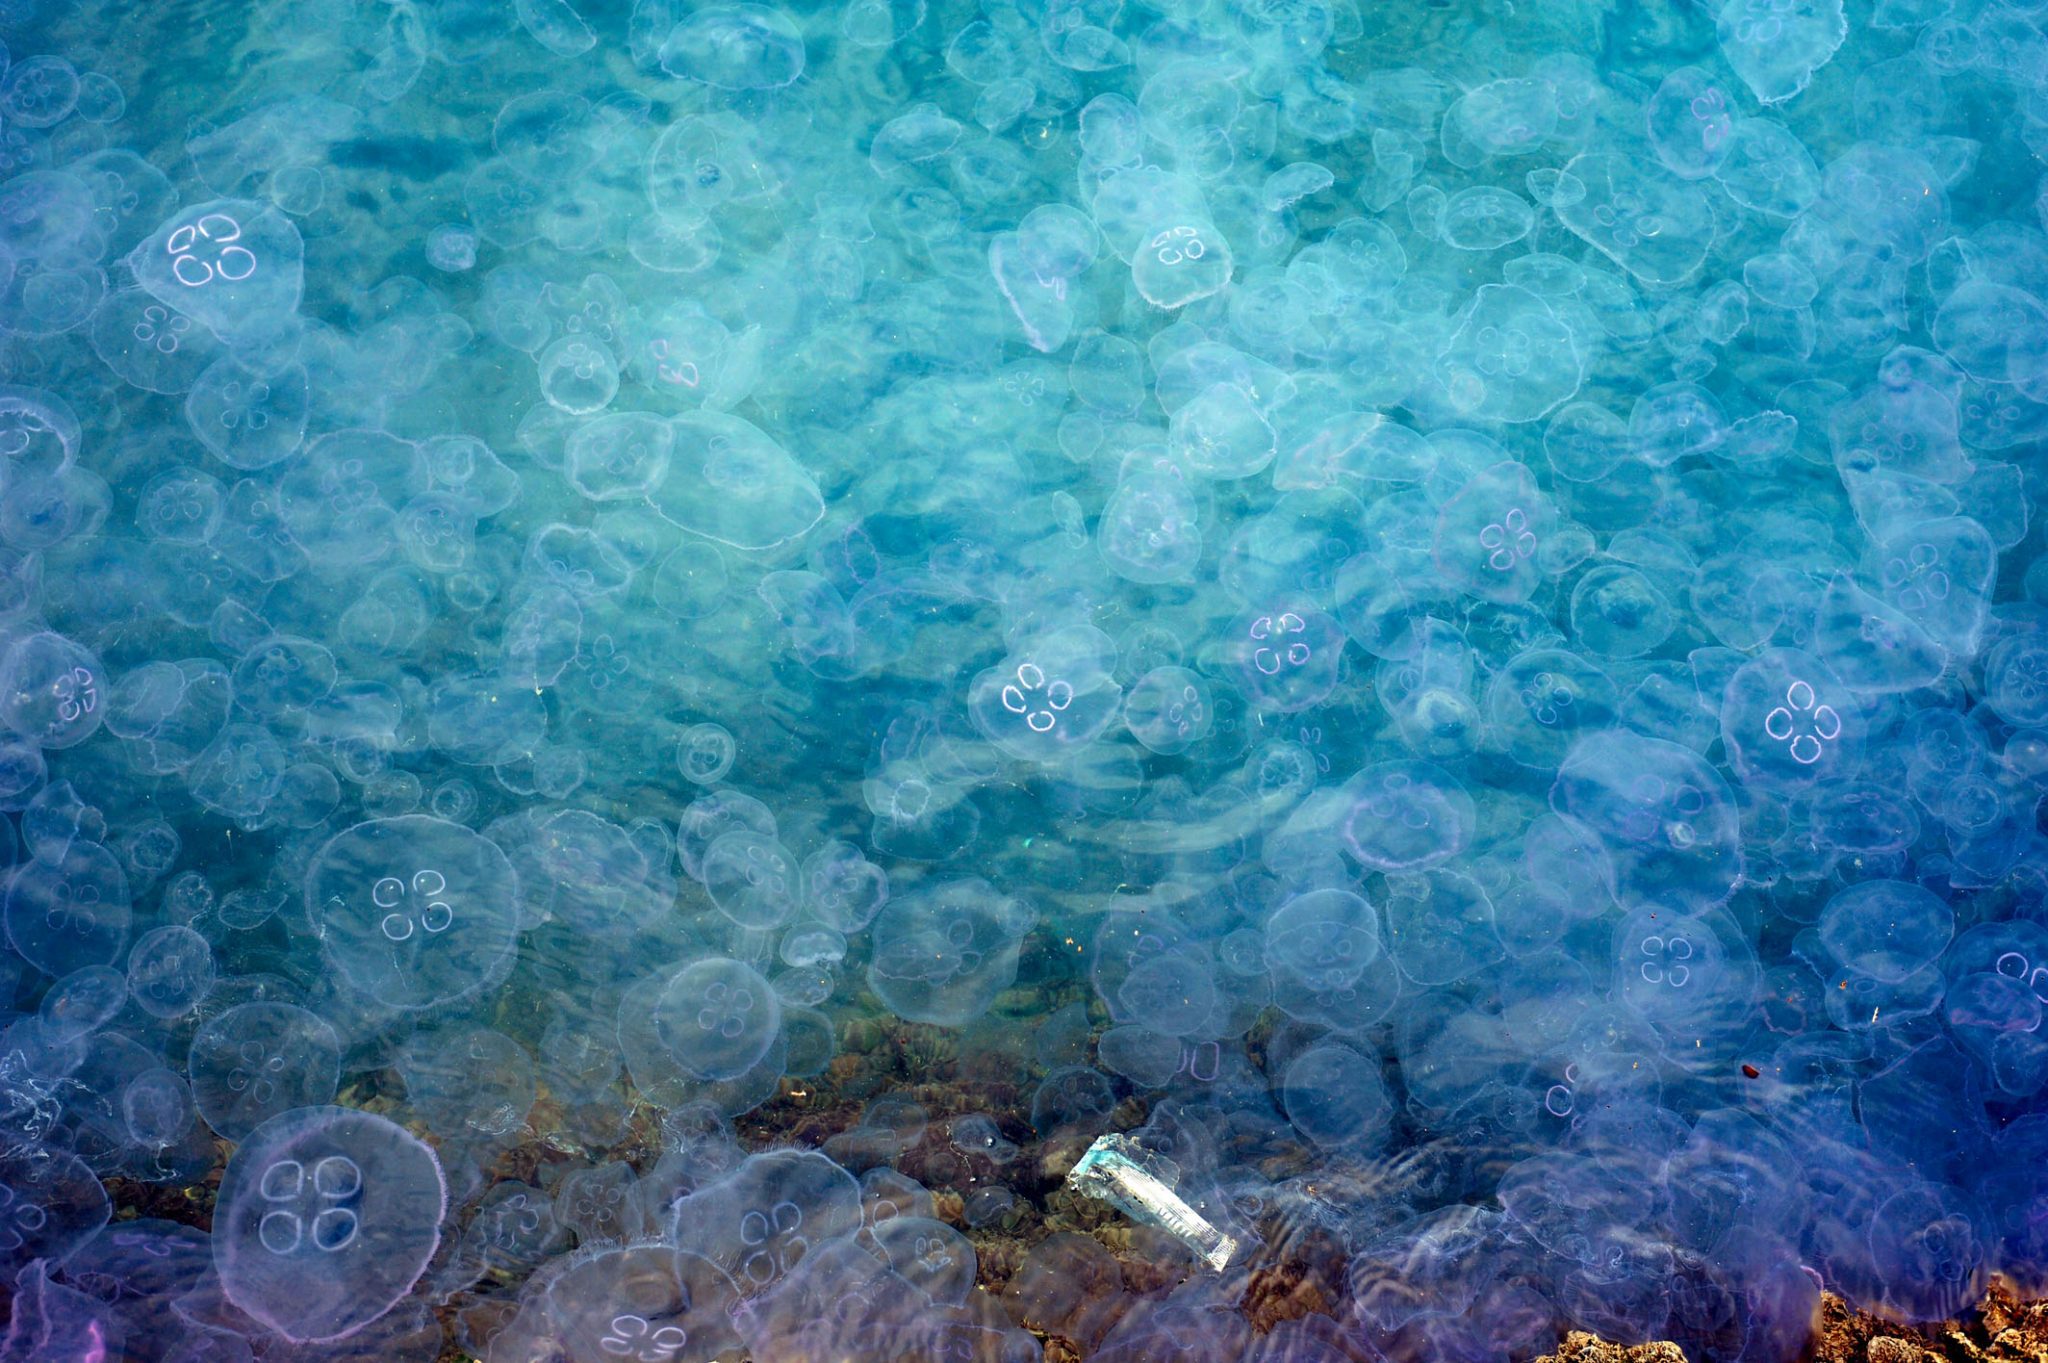 Fish photography in Trieste: Jellyfishes